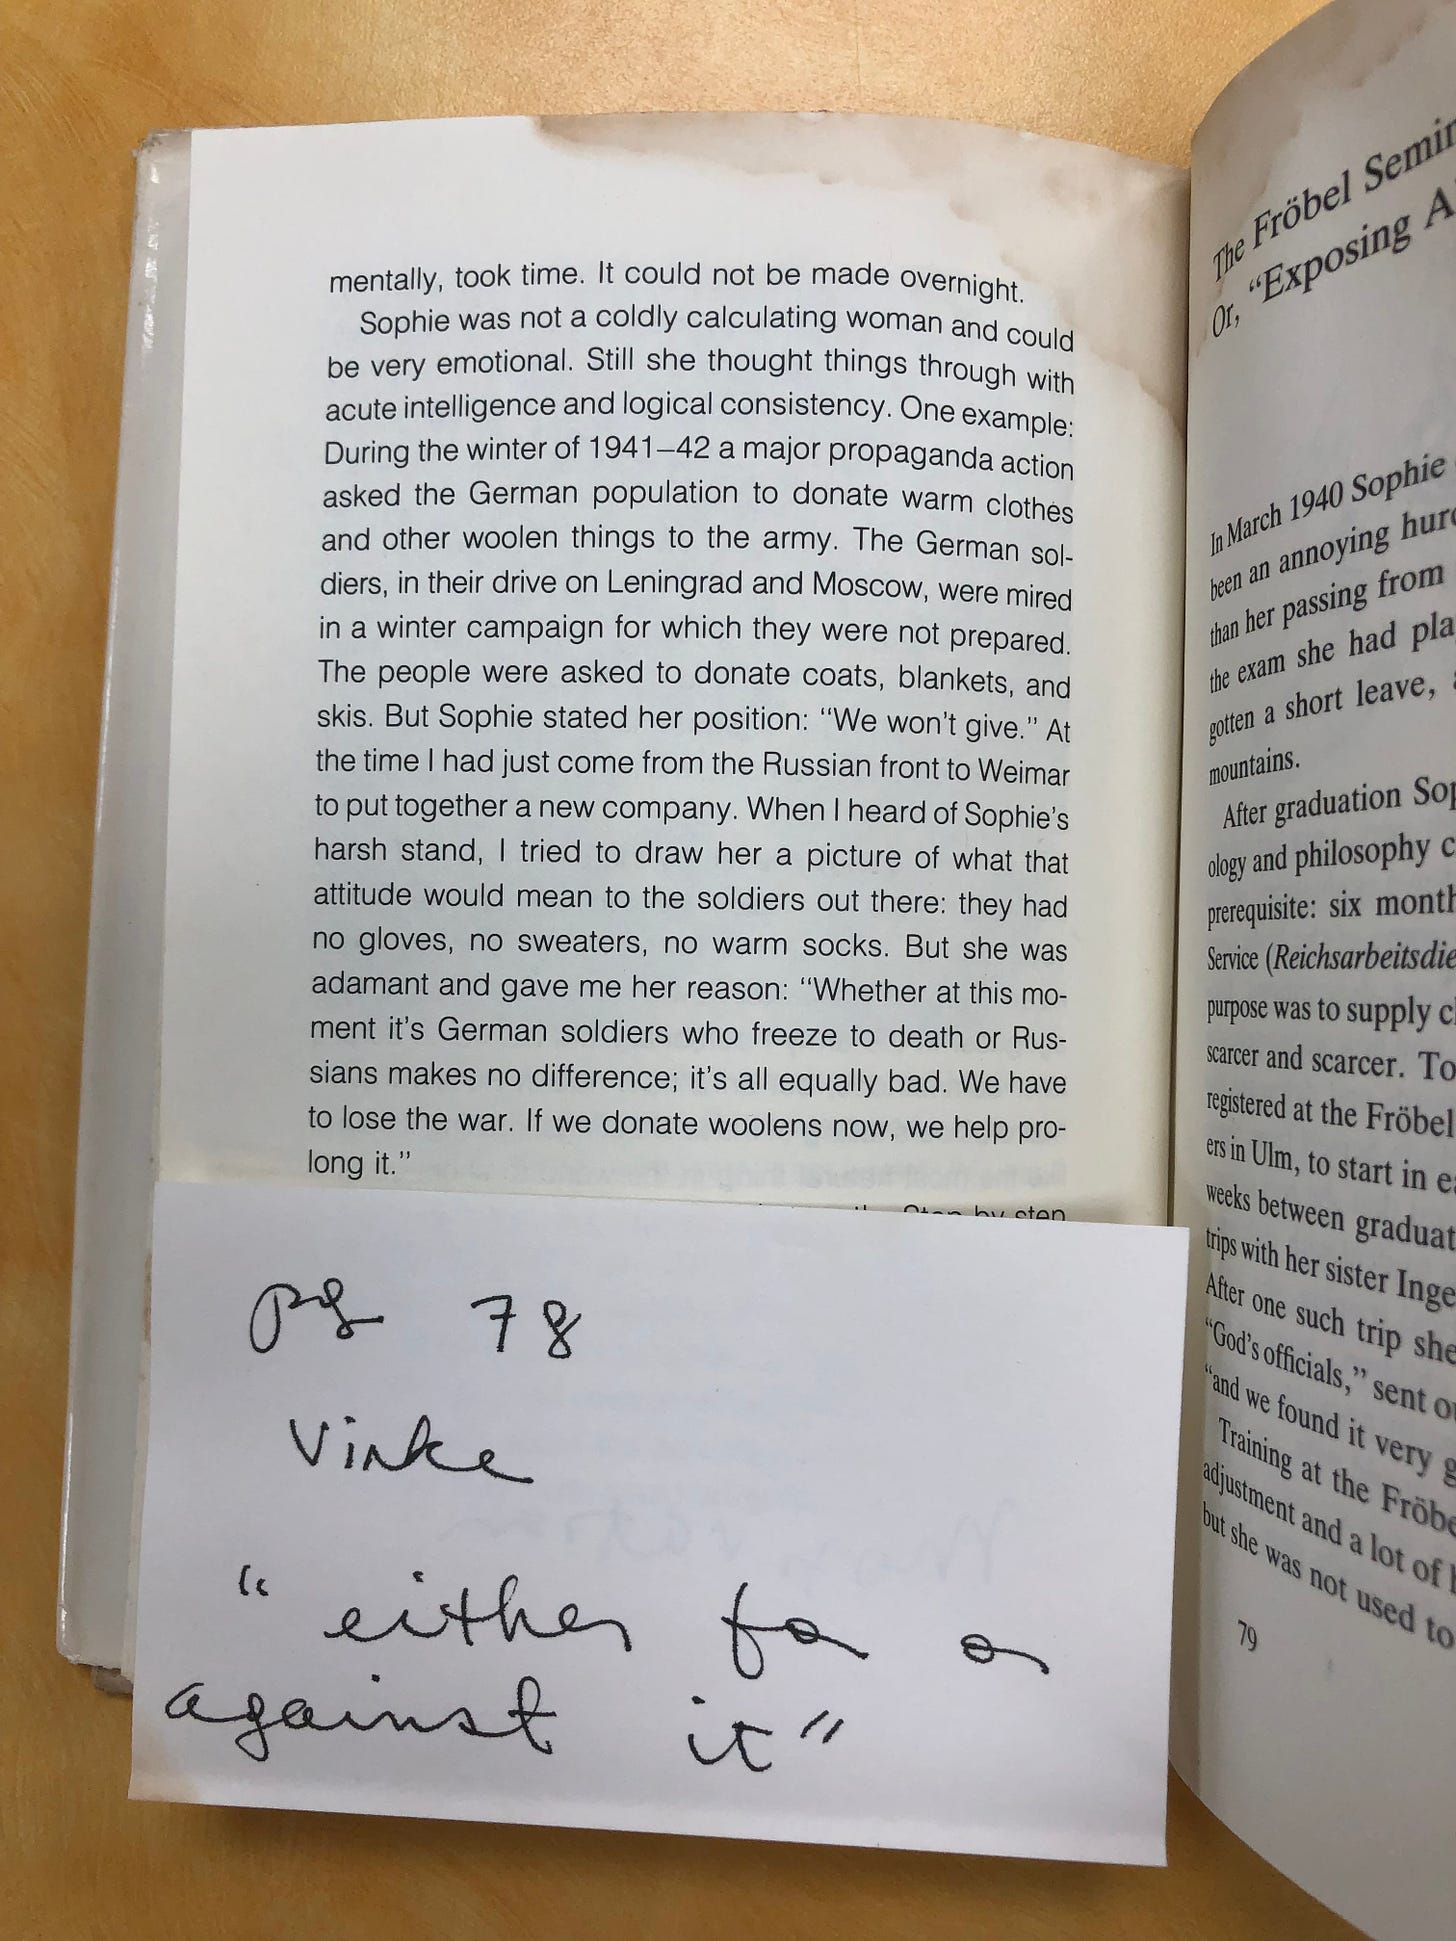 Picture from Hermann Vinke book showing a story about Sophie Scholl, which I have included in the body of this newsletter. There's also an index card with my handwritten note to myself on it -- pg. 78, Vinke "either for or against it"